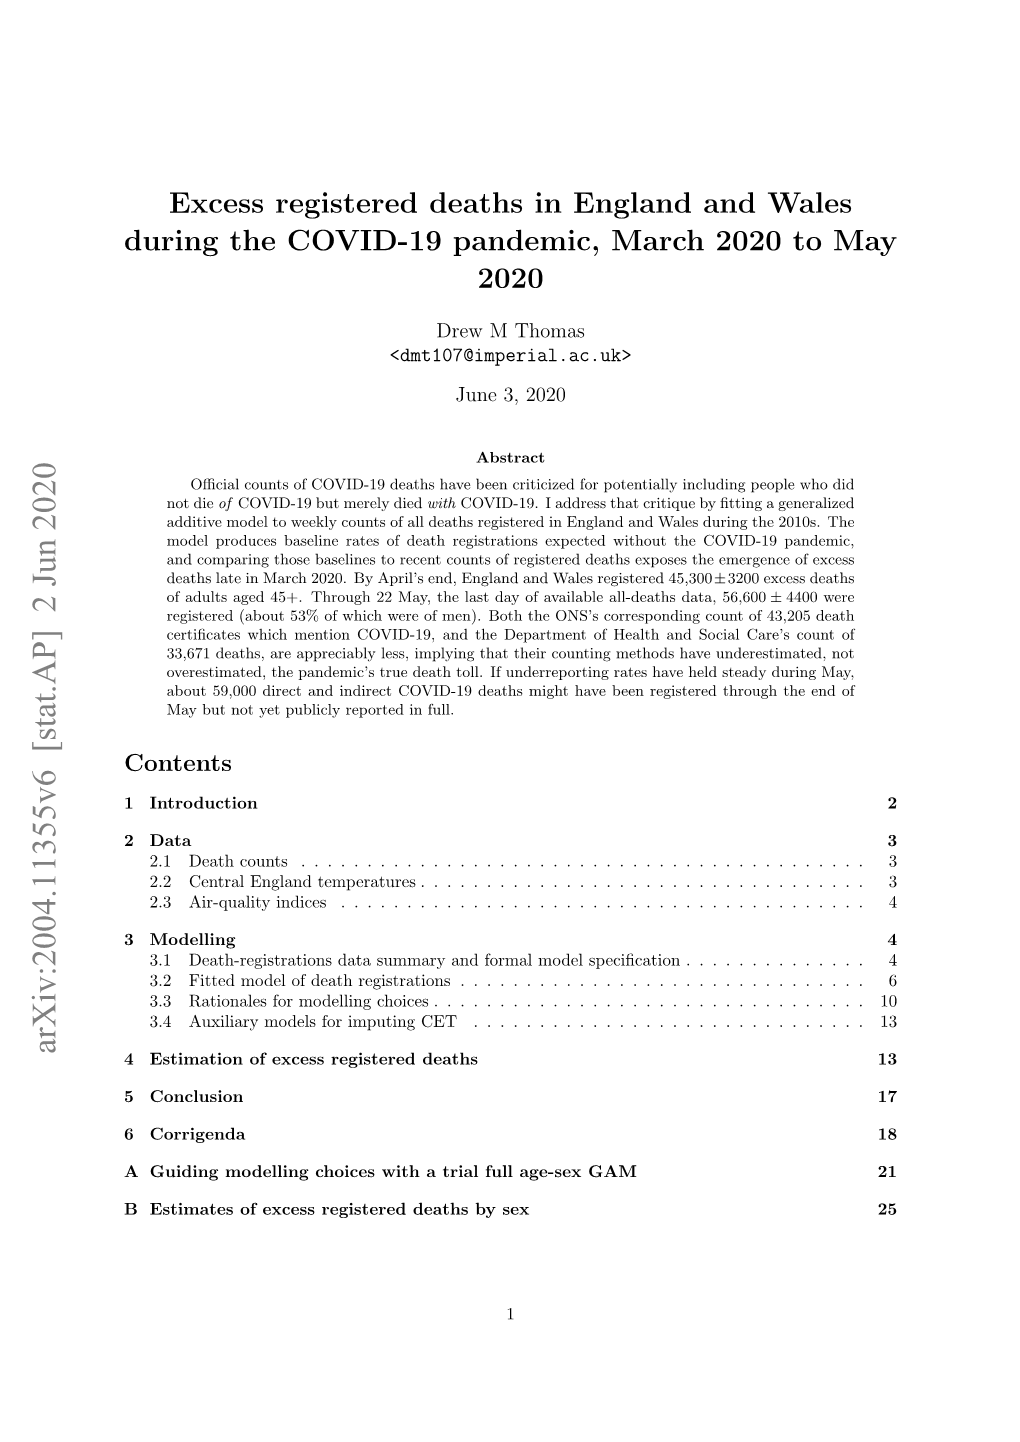 Excess Registered Deaths in England and Wales During the COVID-19 Pandemic, March 2020 to May 2020